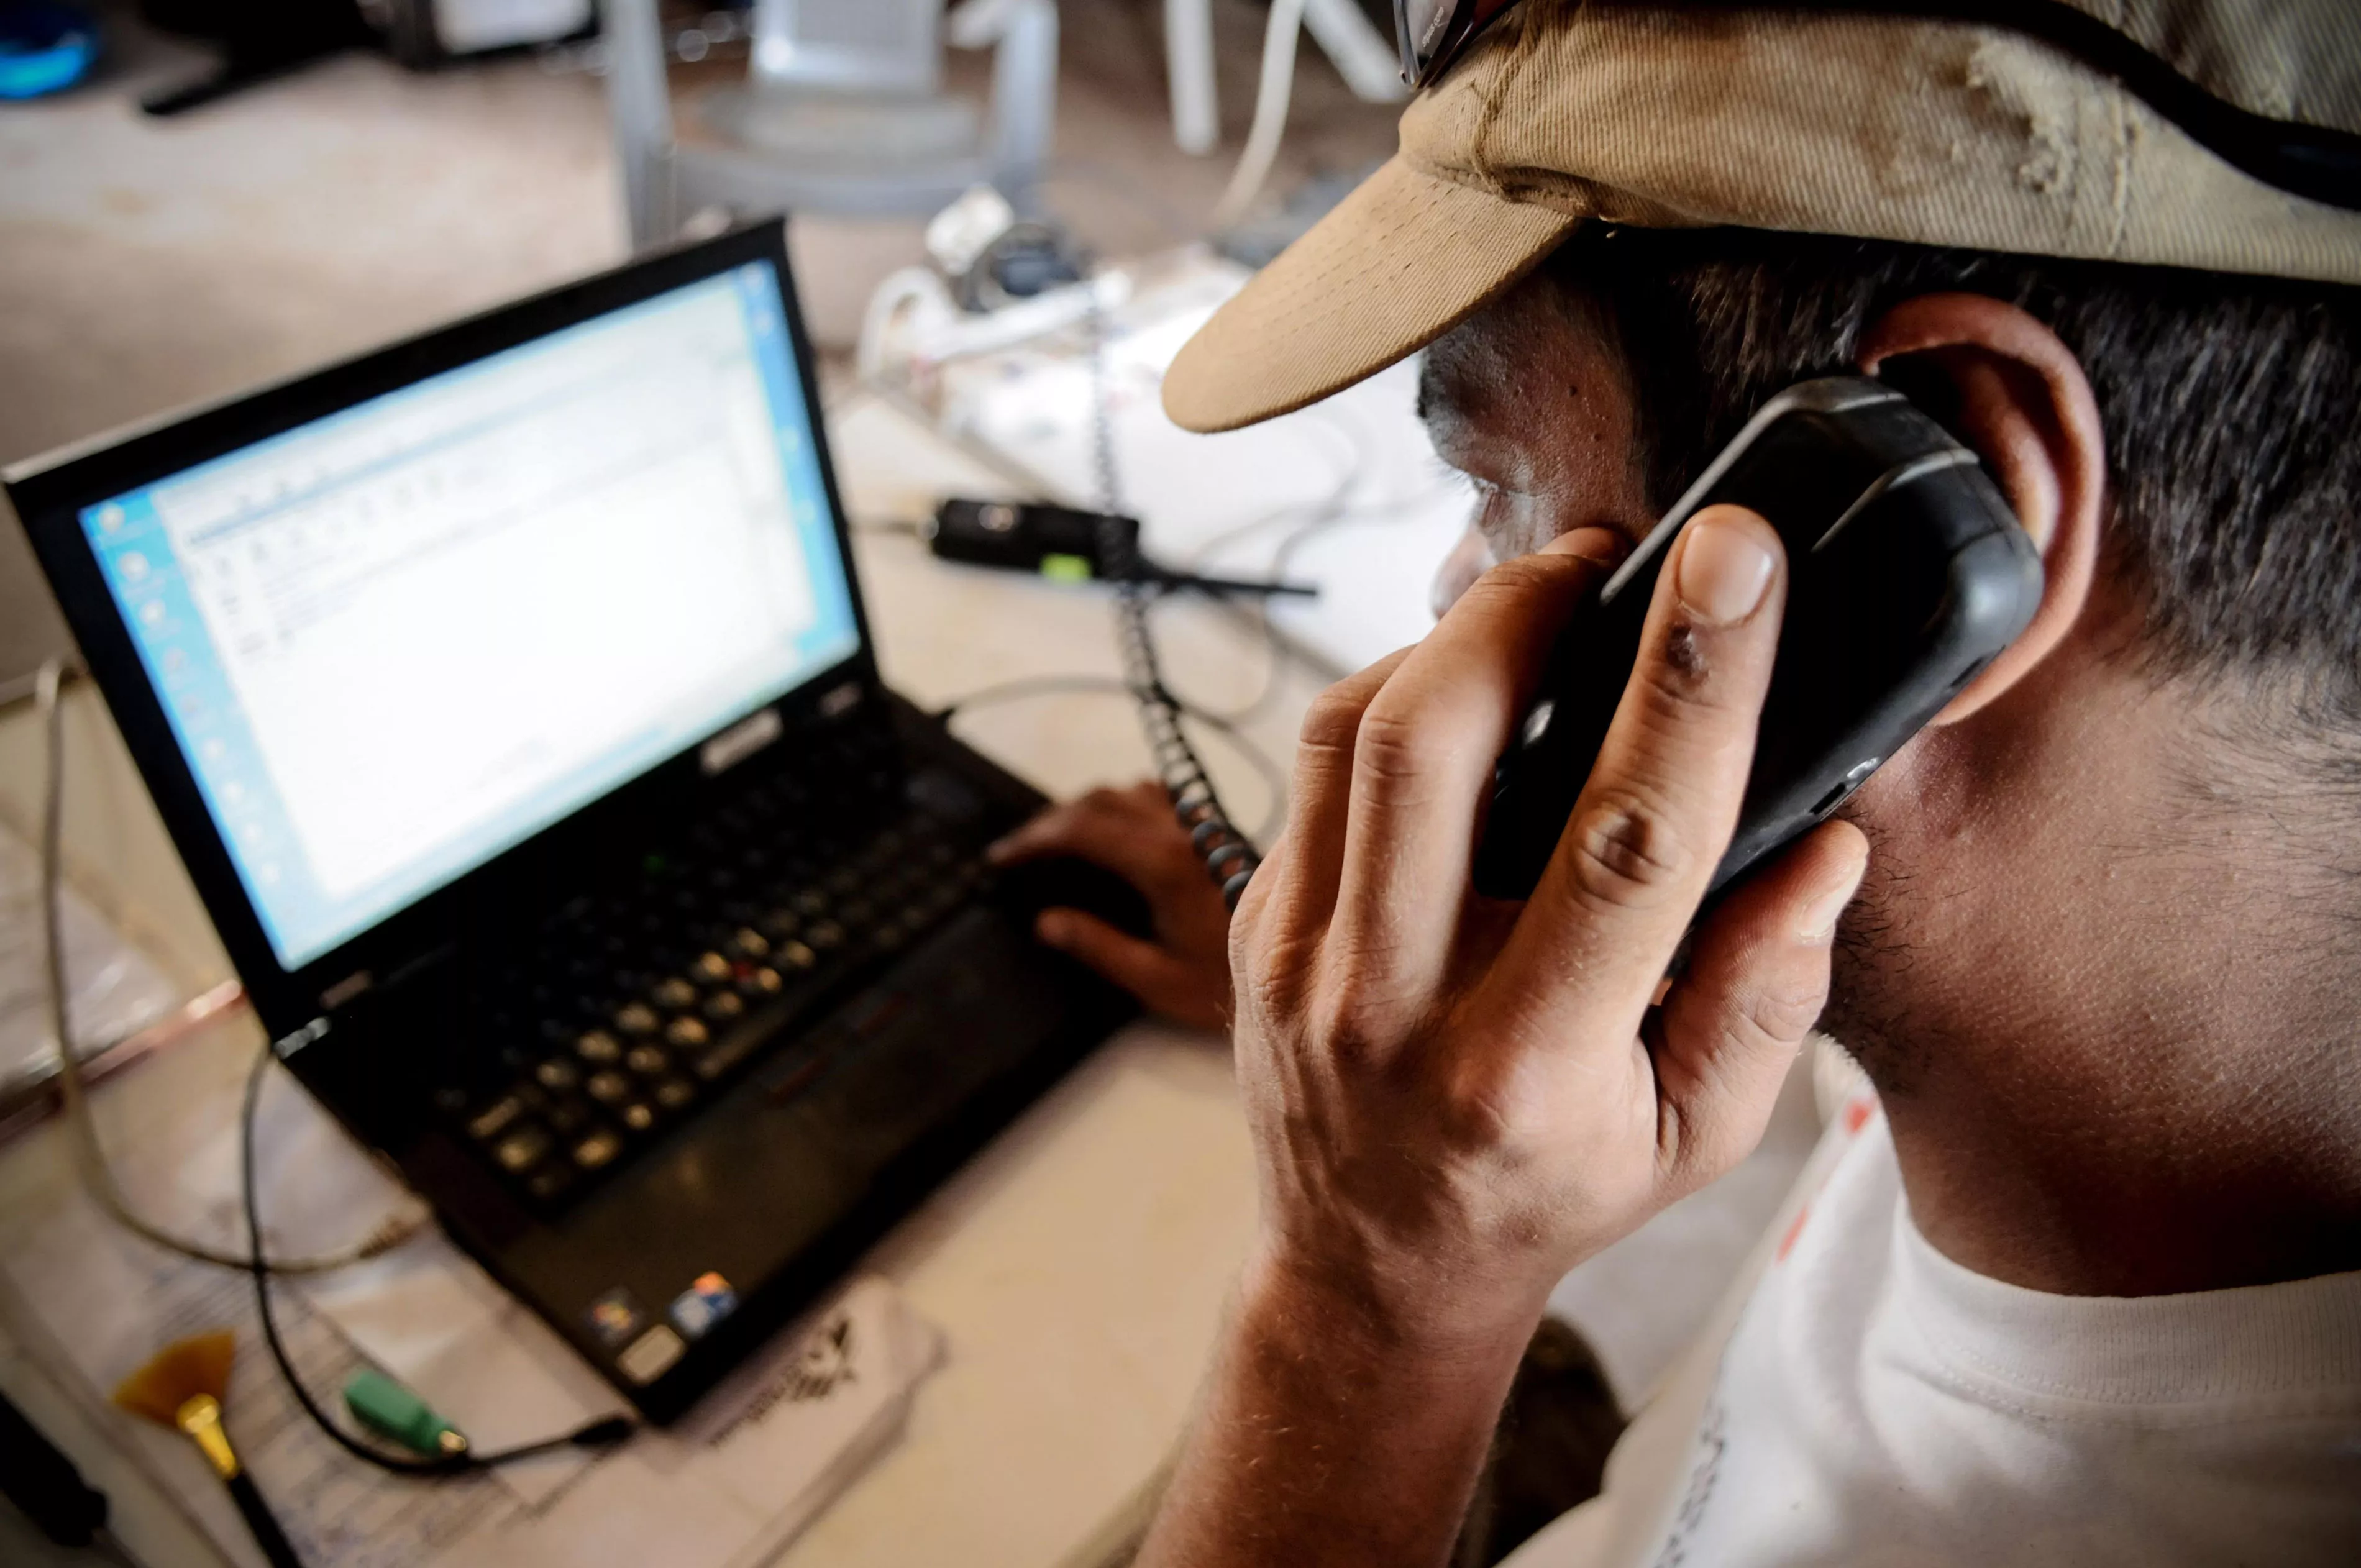 MSF employee using a phone and laptop